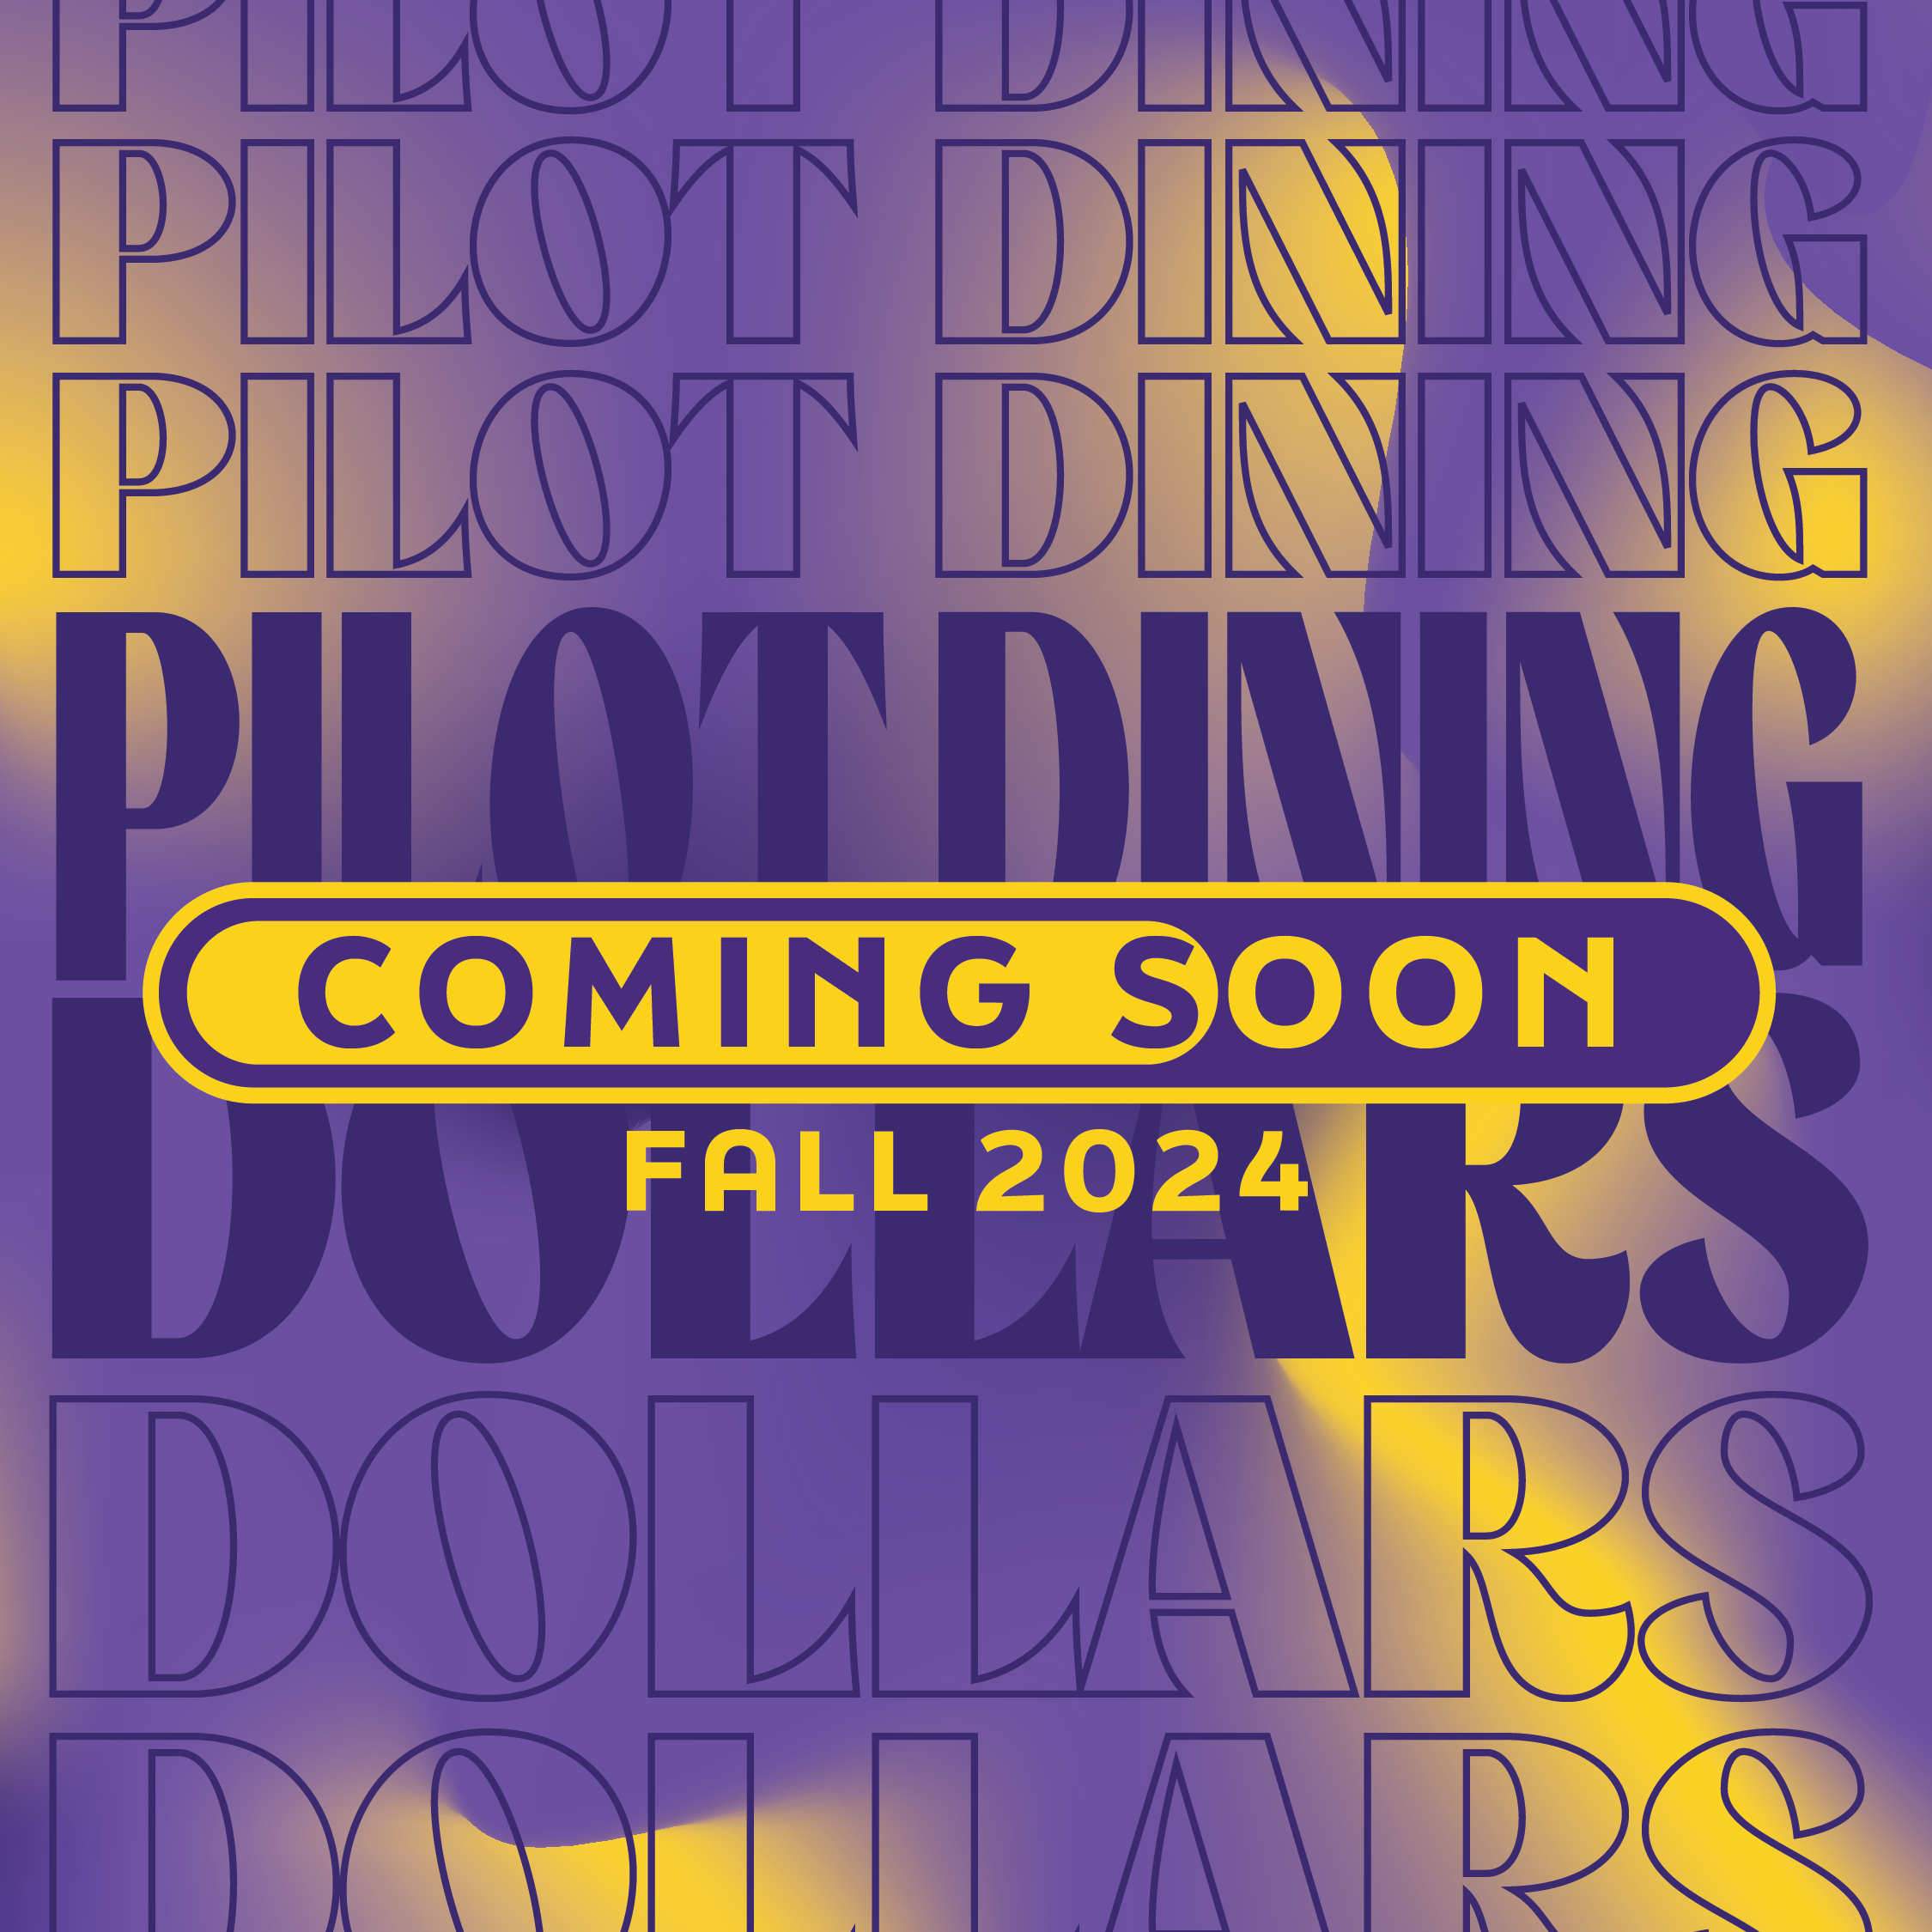 lsus meal plans coming soon 2024